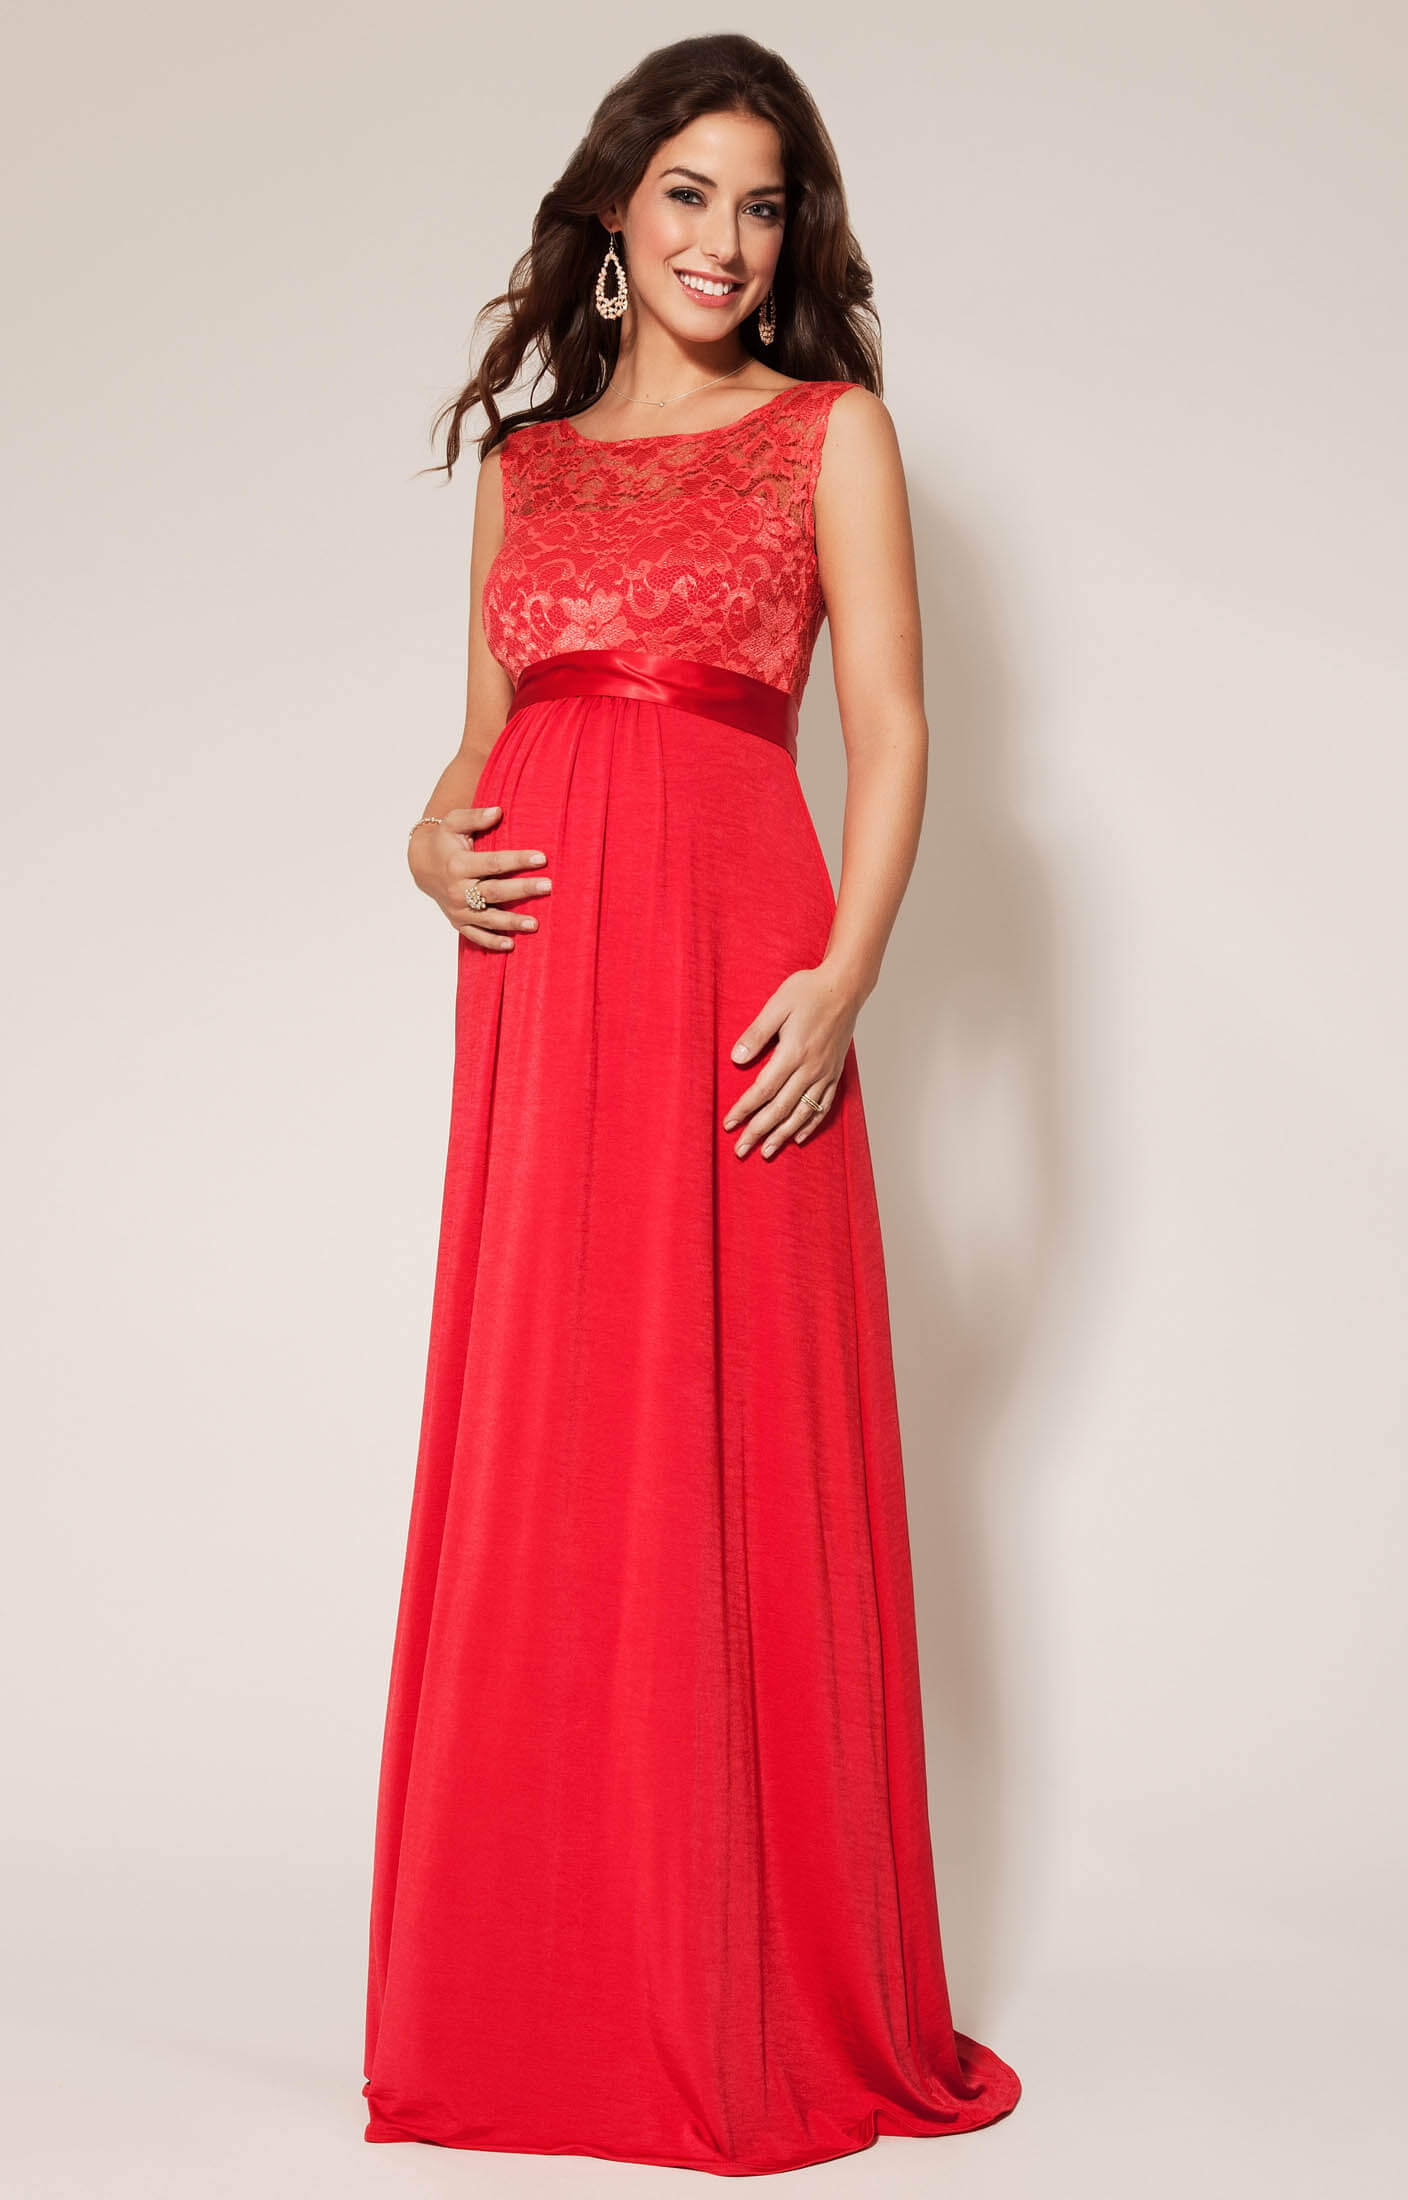 Serenity Maternity Maxi Dress Bellini Pink - Maternity Wedding Dresses,  Evening Wear and Party Clothes by Tiffany Rose UK